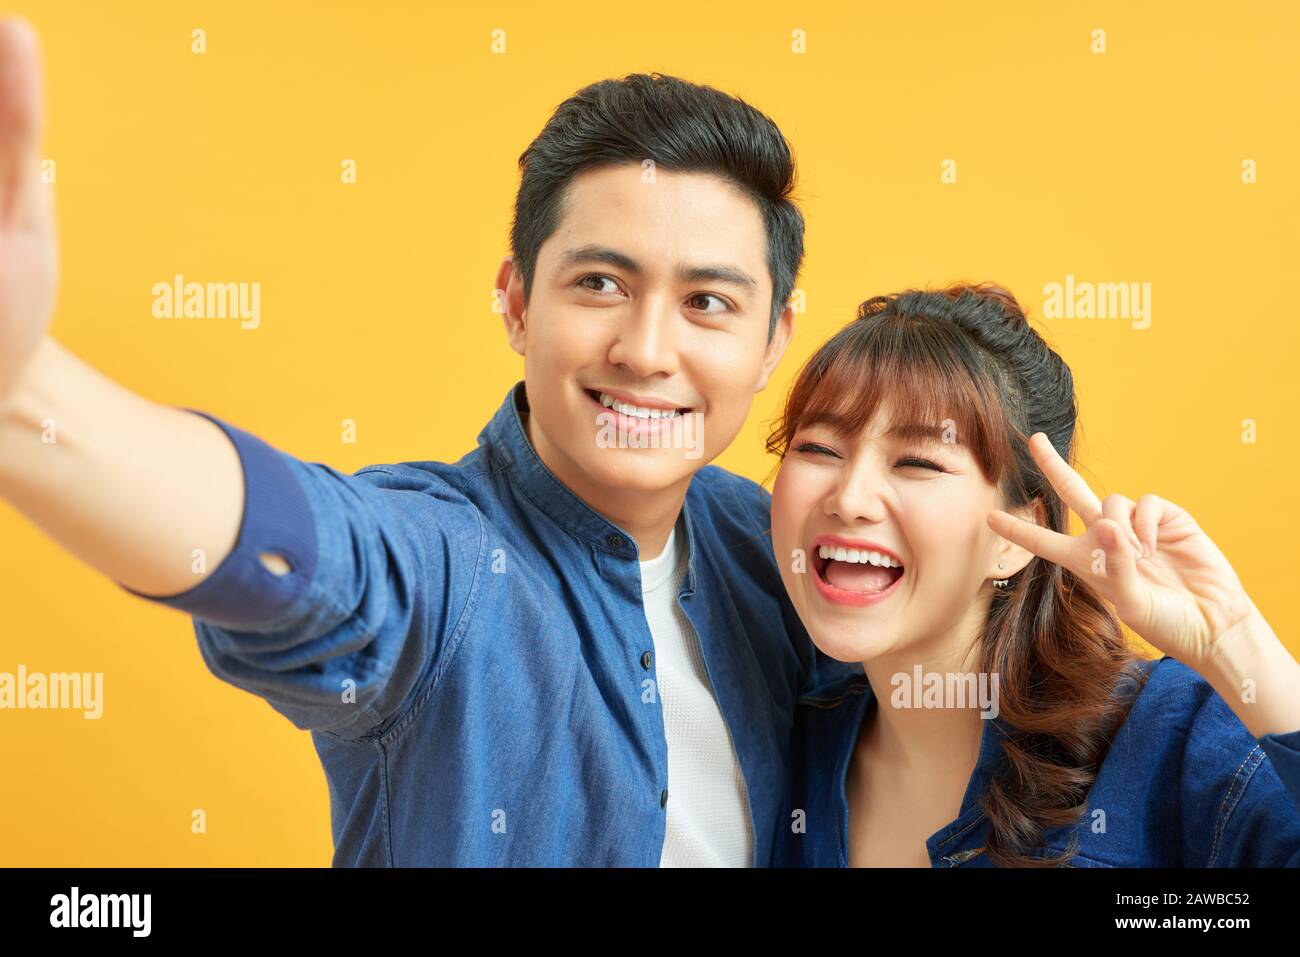 Self portrait of funny foolish cheerful adorable young cute couple smiling showing teeth, looking straight with opened mouths over yellow background, Stock Photo